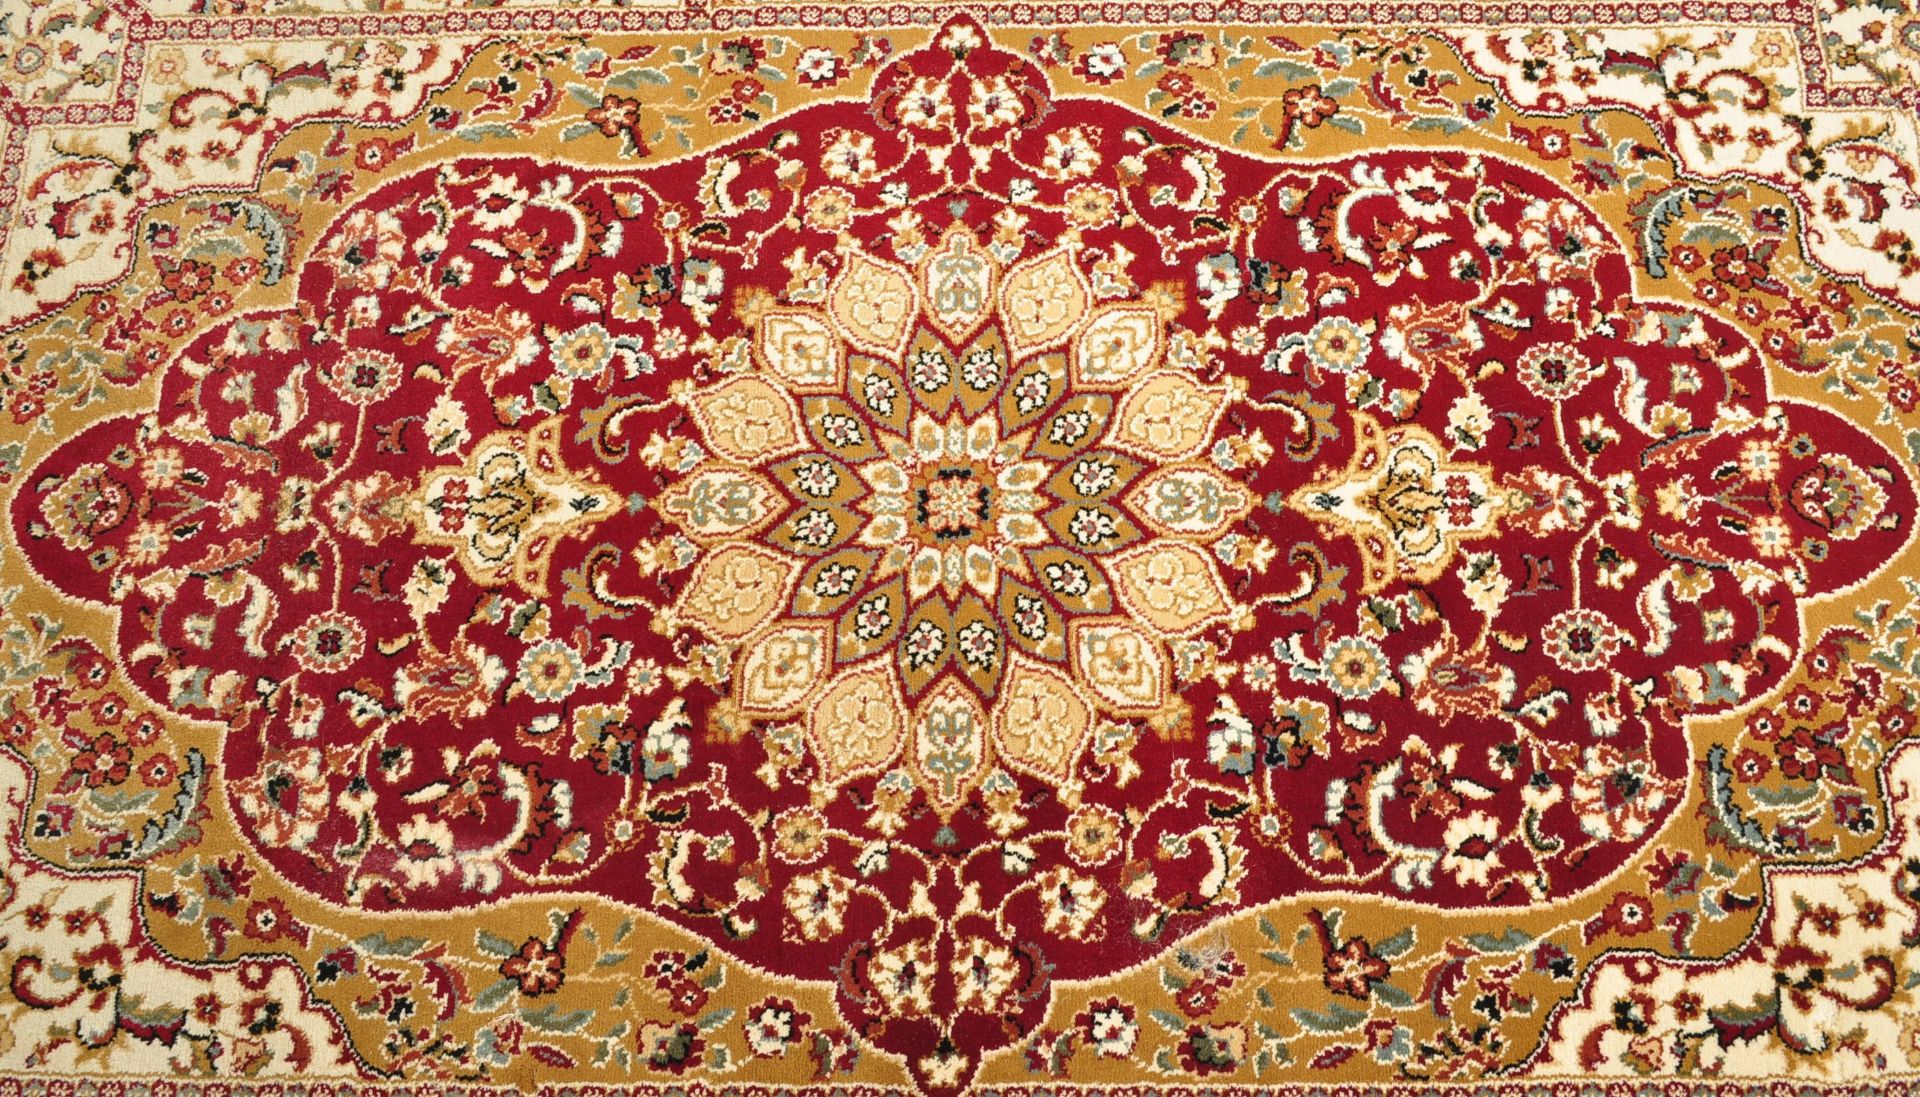 TWO CONTEMPORARY PERSIAN ISLAMIC RUGS - Image 7 of 8